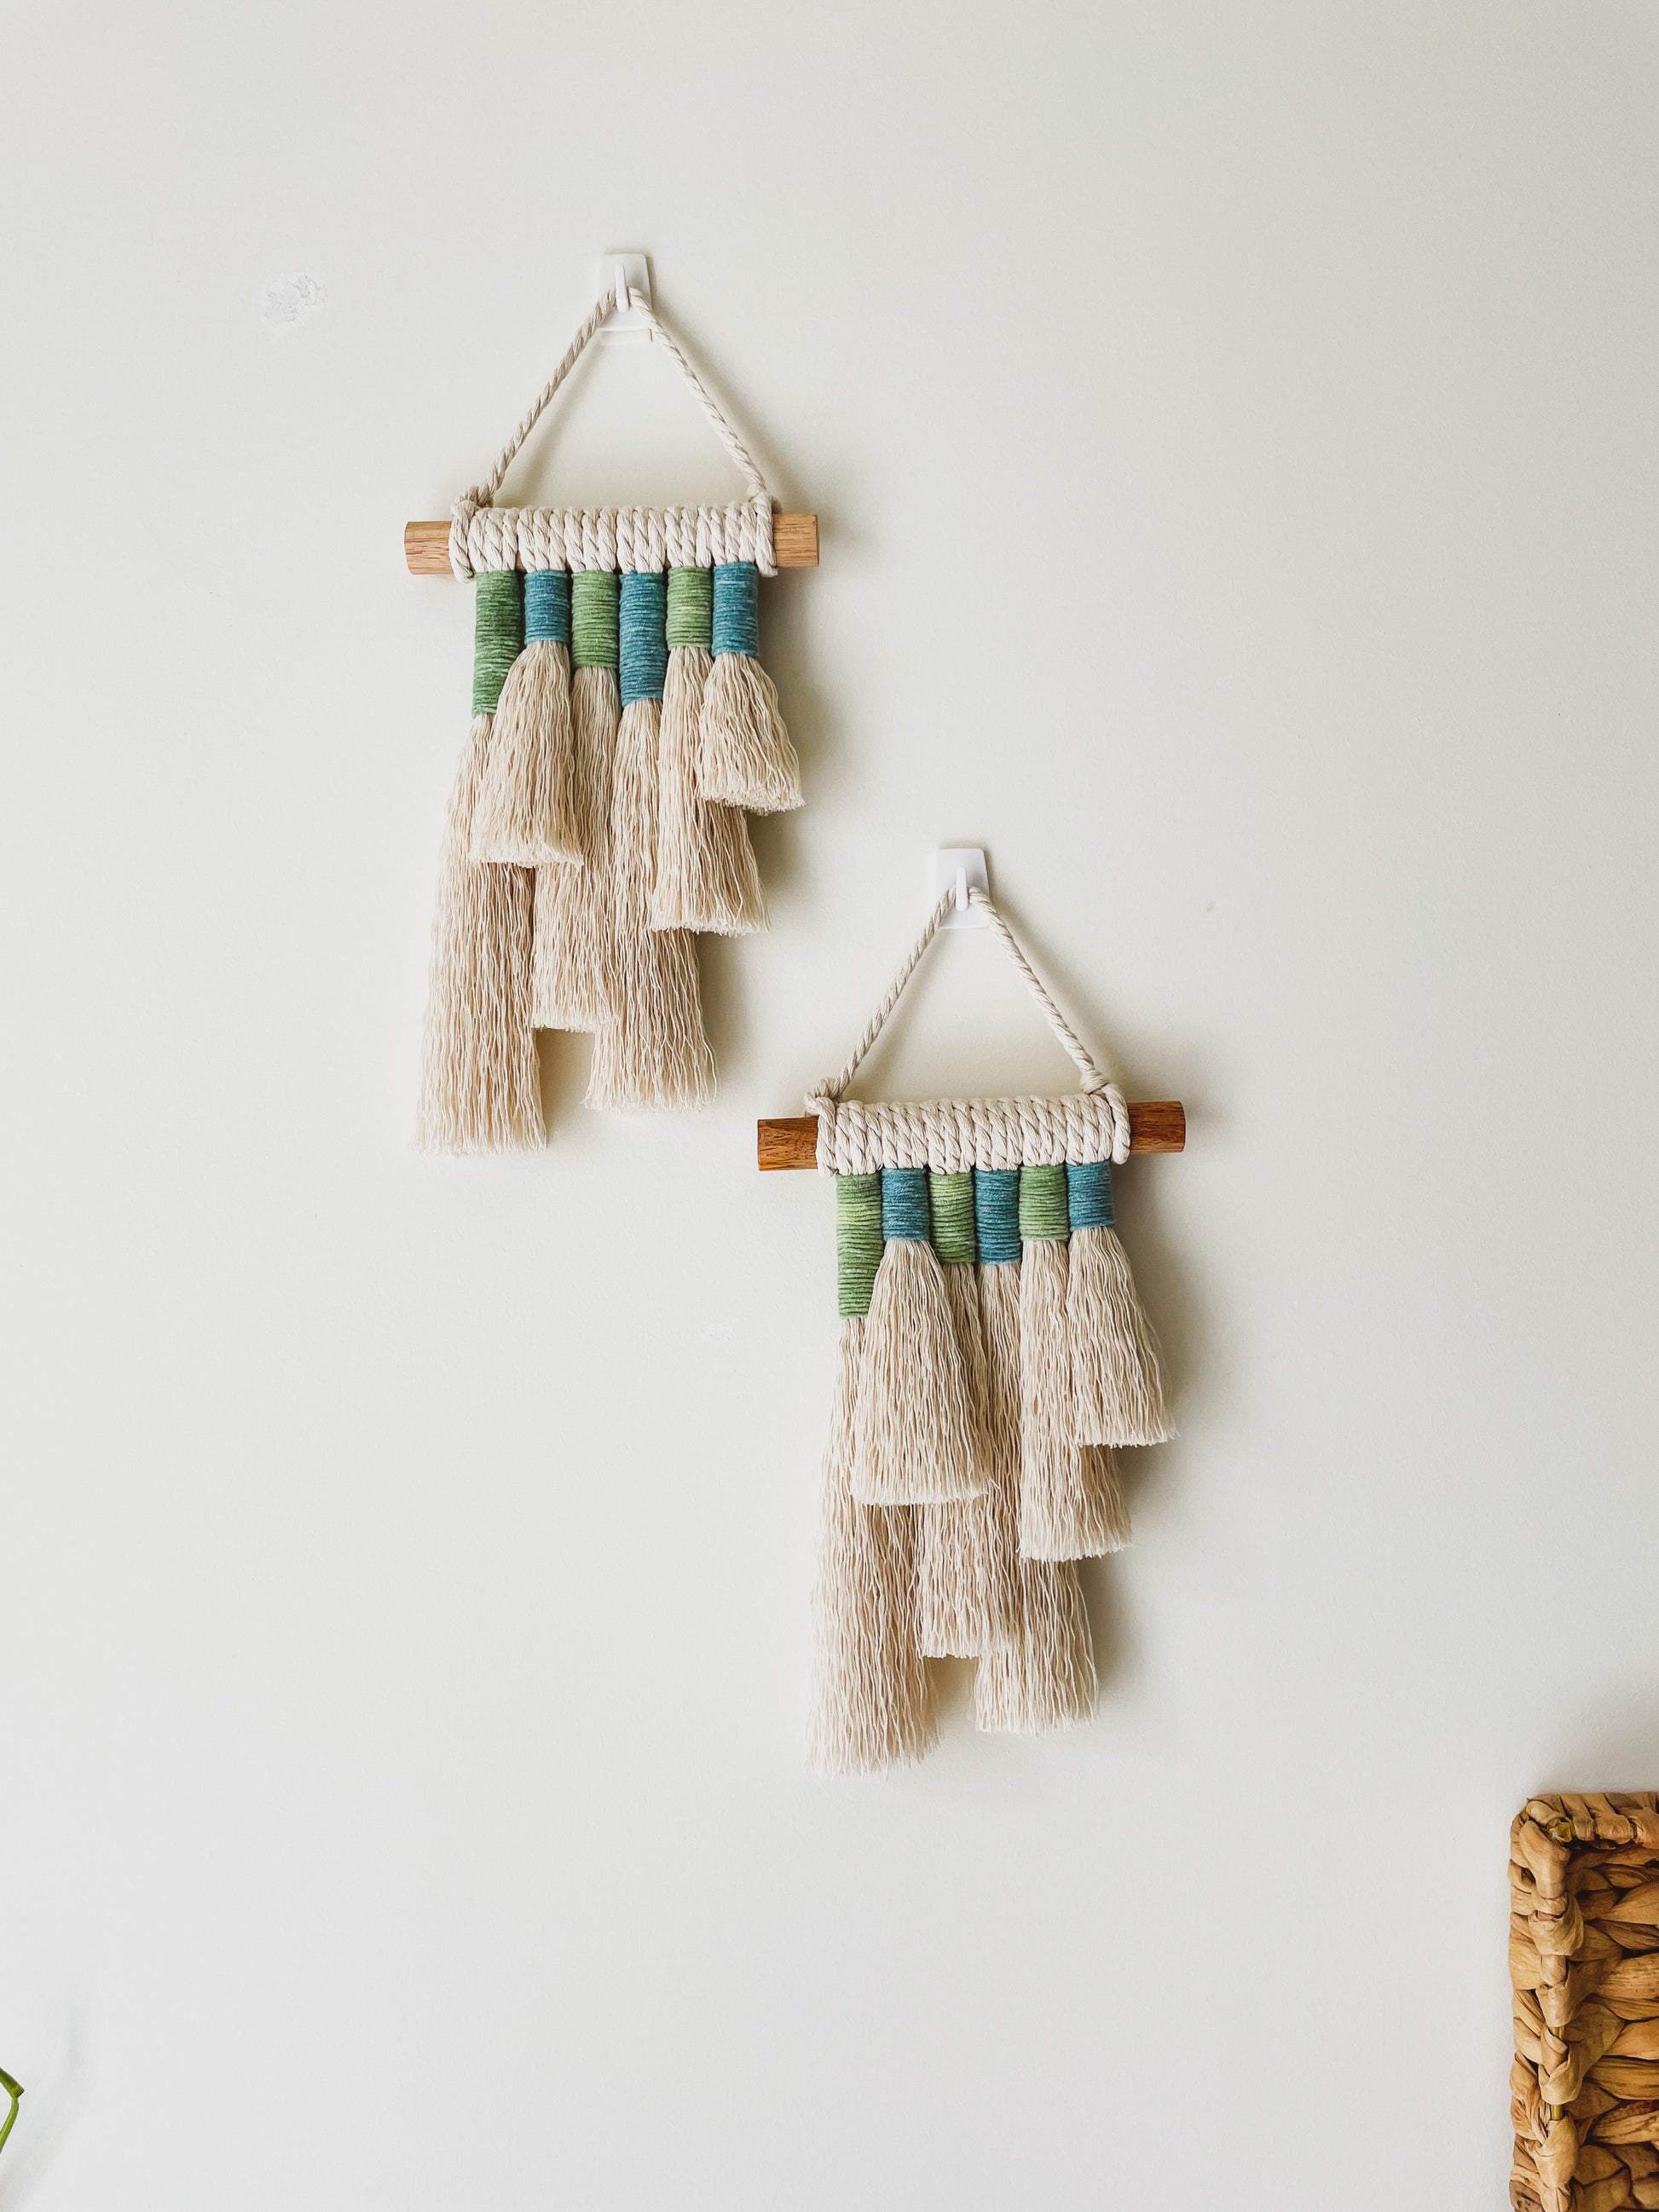 Two Ocean Breeze Mini wall hangings hanged on a wall front view